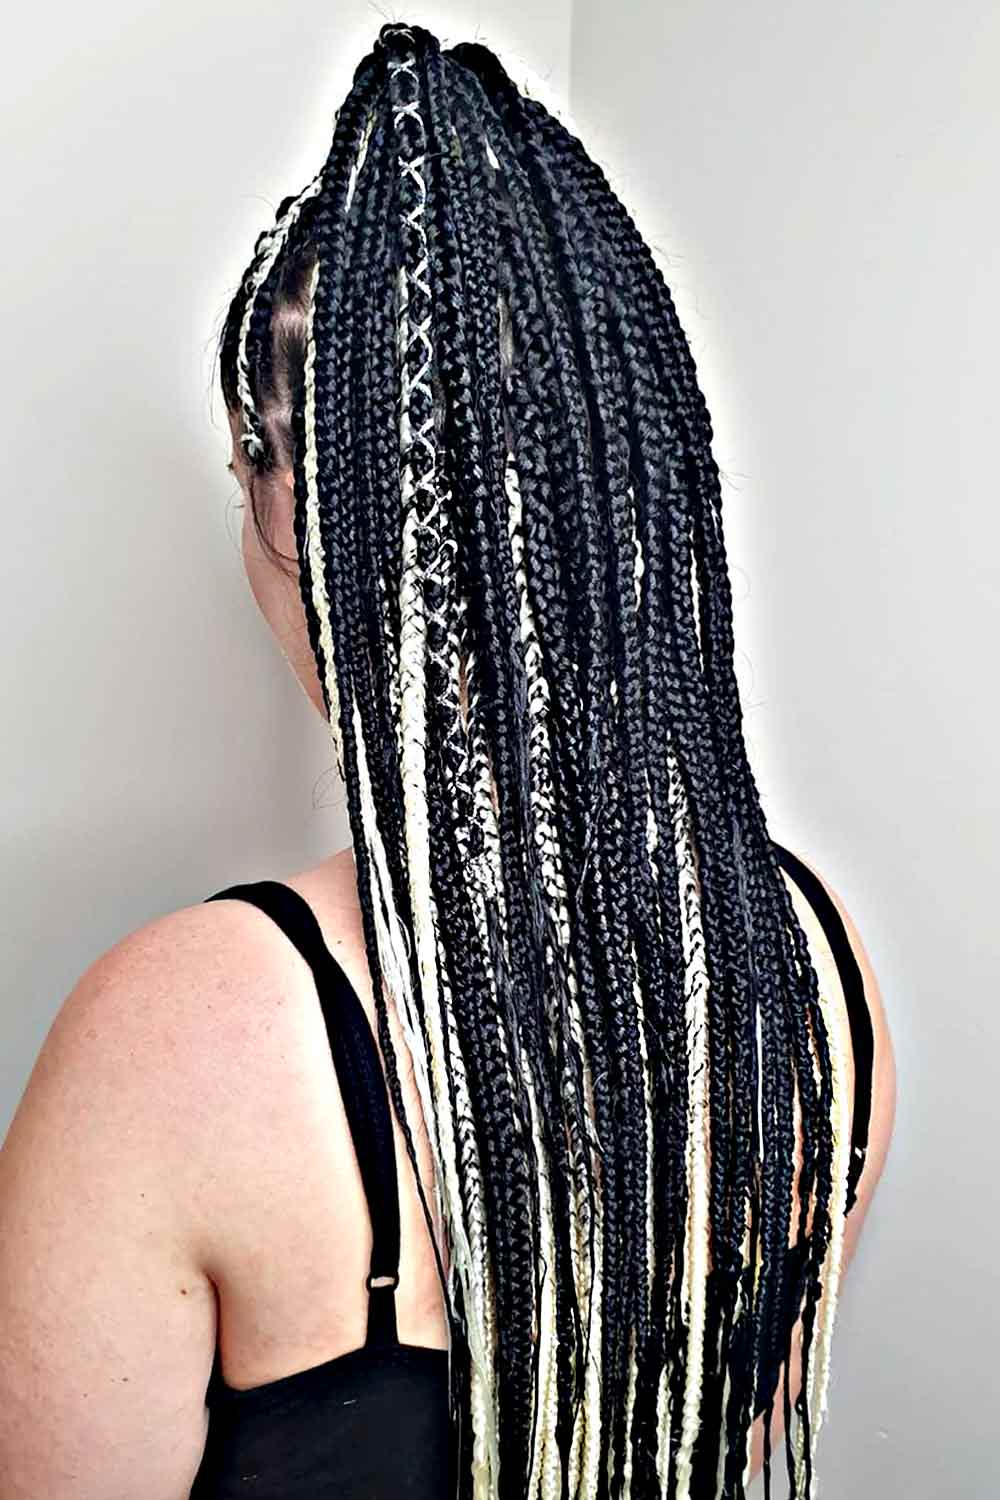 Rubber Band Hairstyles with Braids #rubberbandhairstyles #naturalhairstyles #kidshairstyles